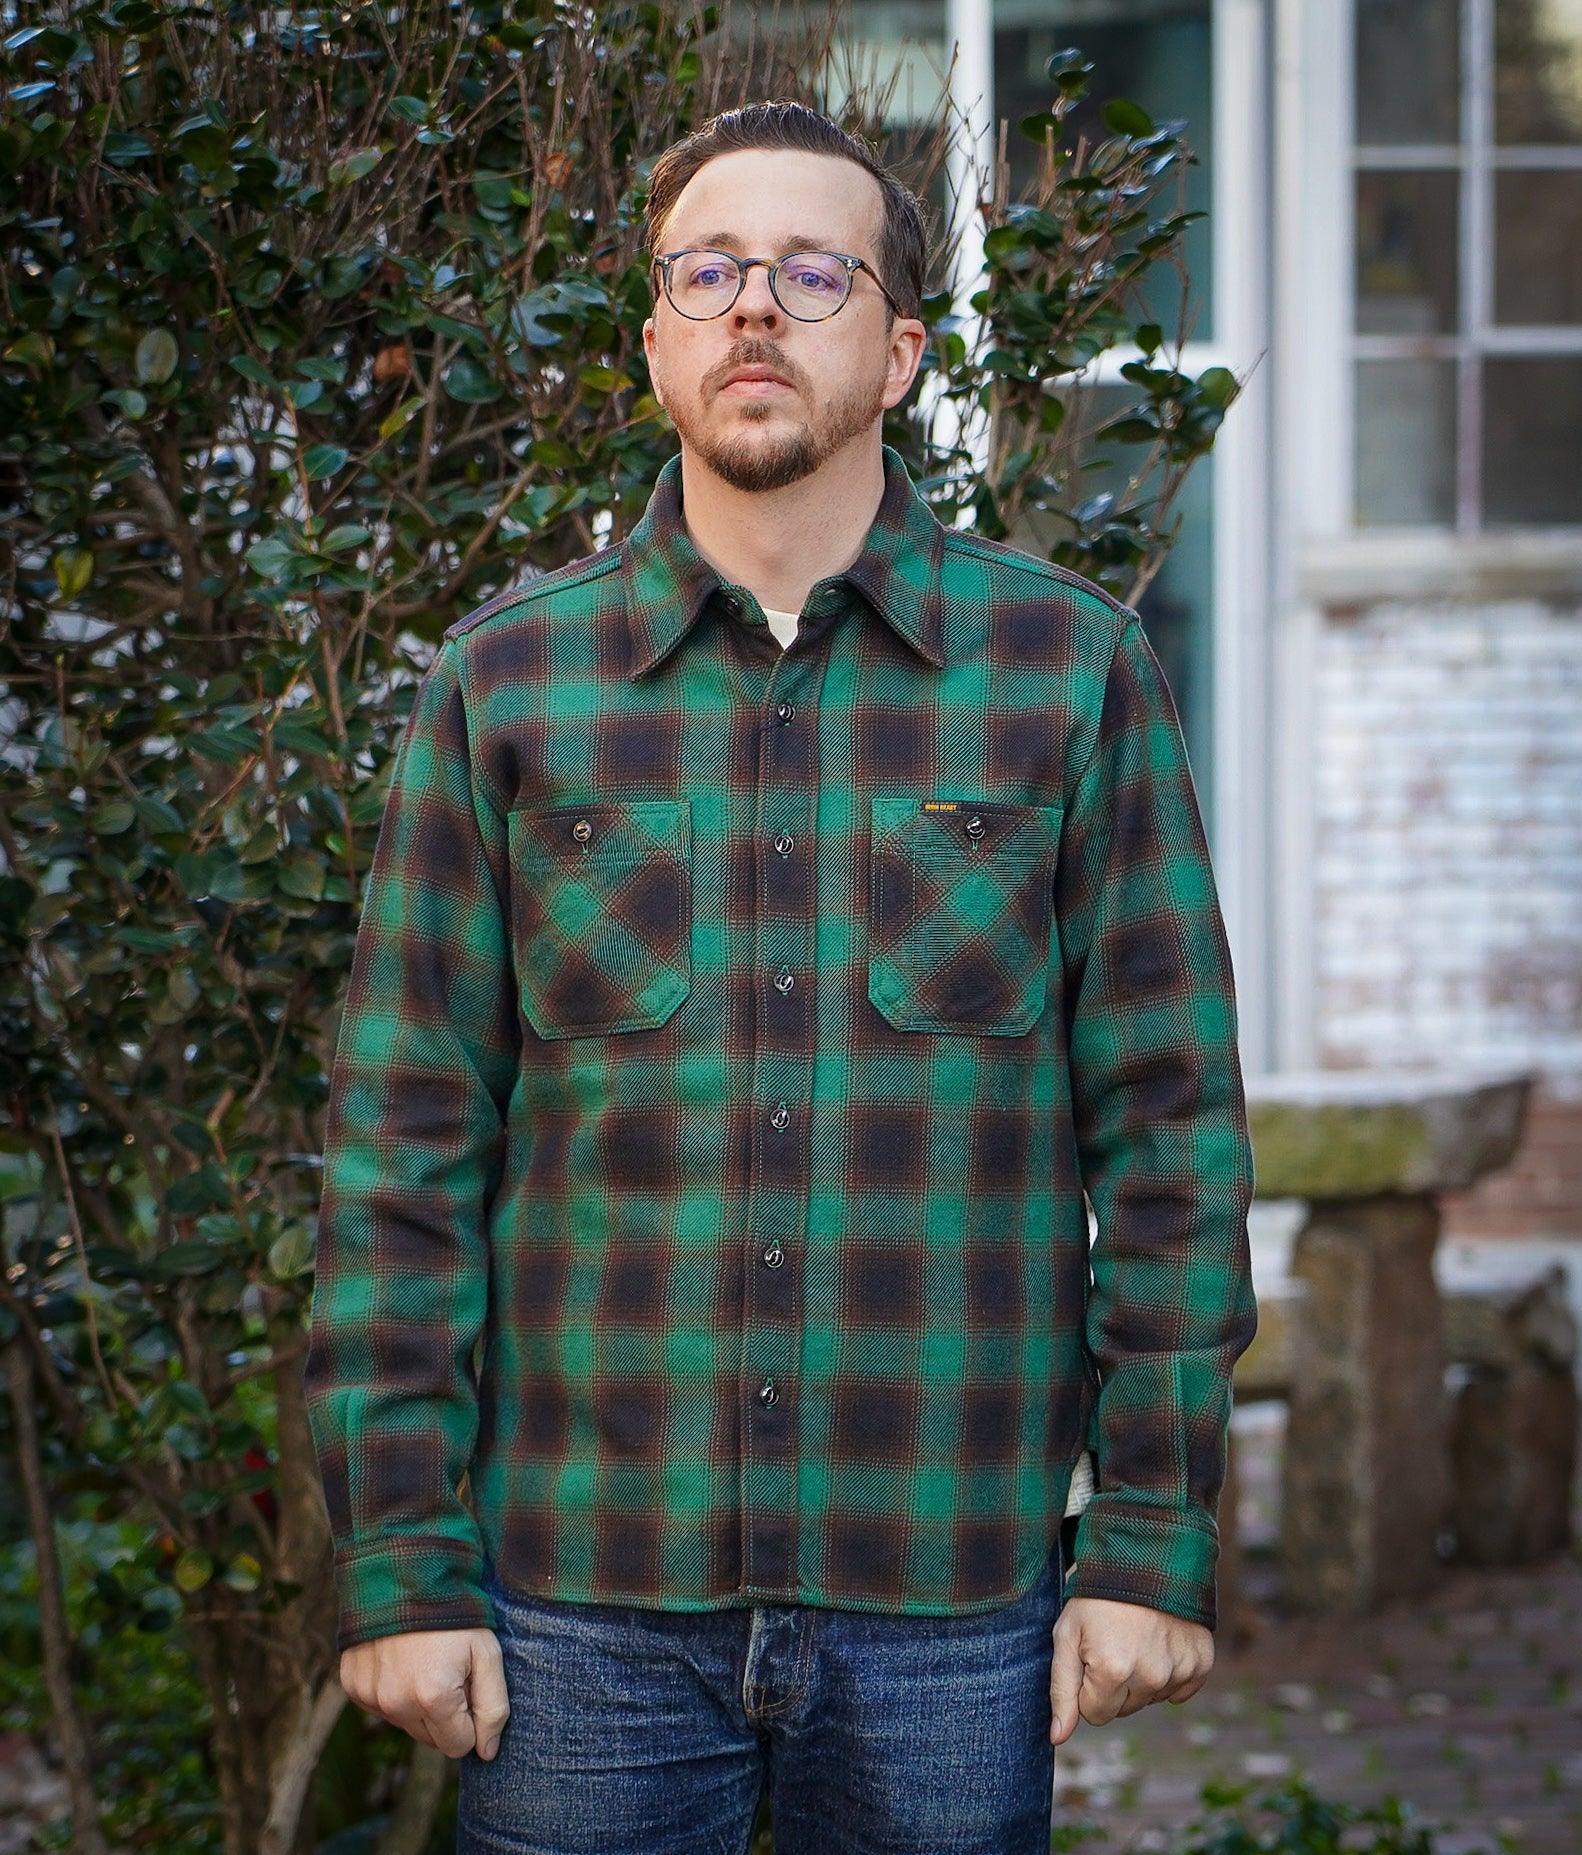 Iron Heart IHSH-379-GRN Ultra Heavy Flannel Ombré Check Work Shirt - Green - Guilty Party